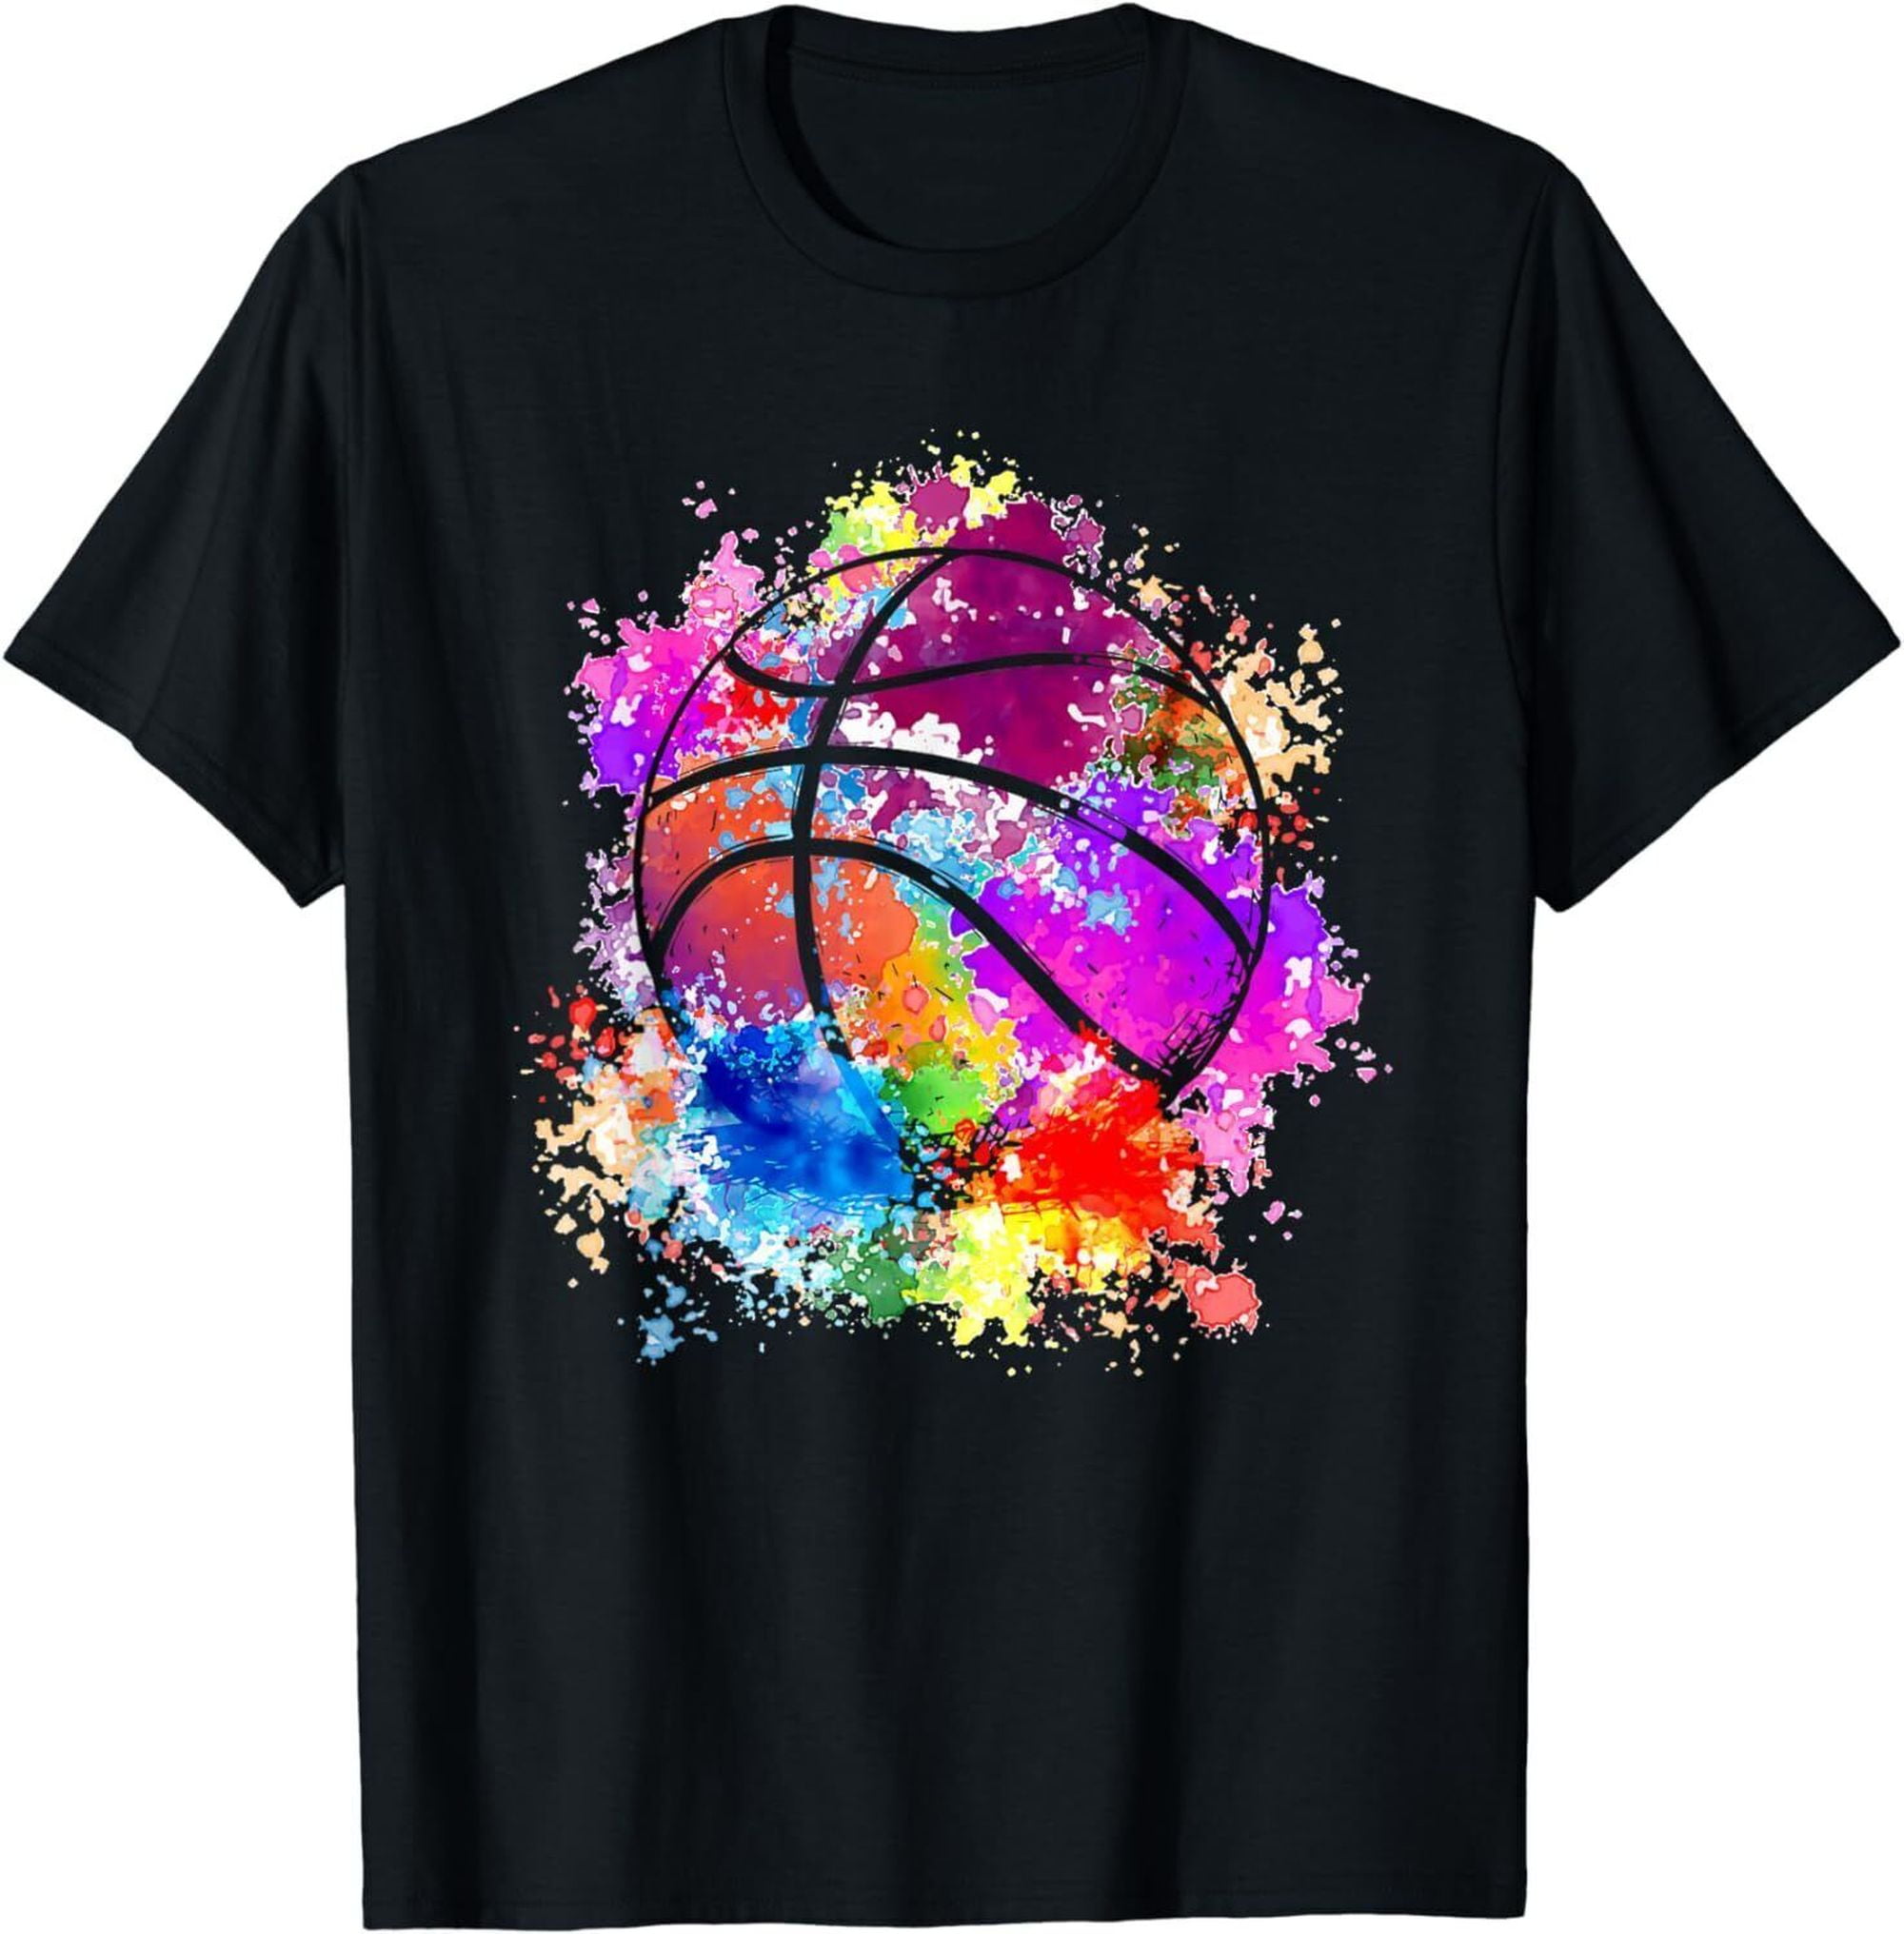 Score Big in Style with Fashionable Females' Trendy Basketball Shirts ...